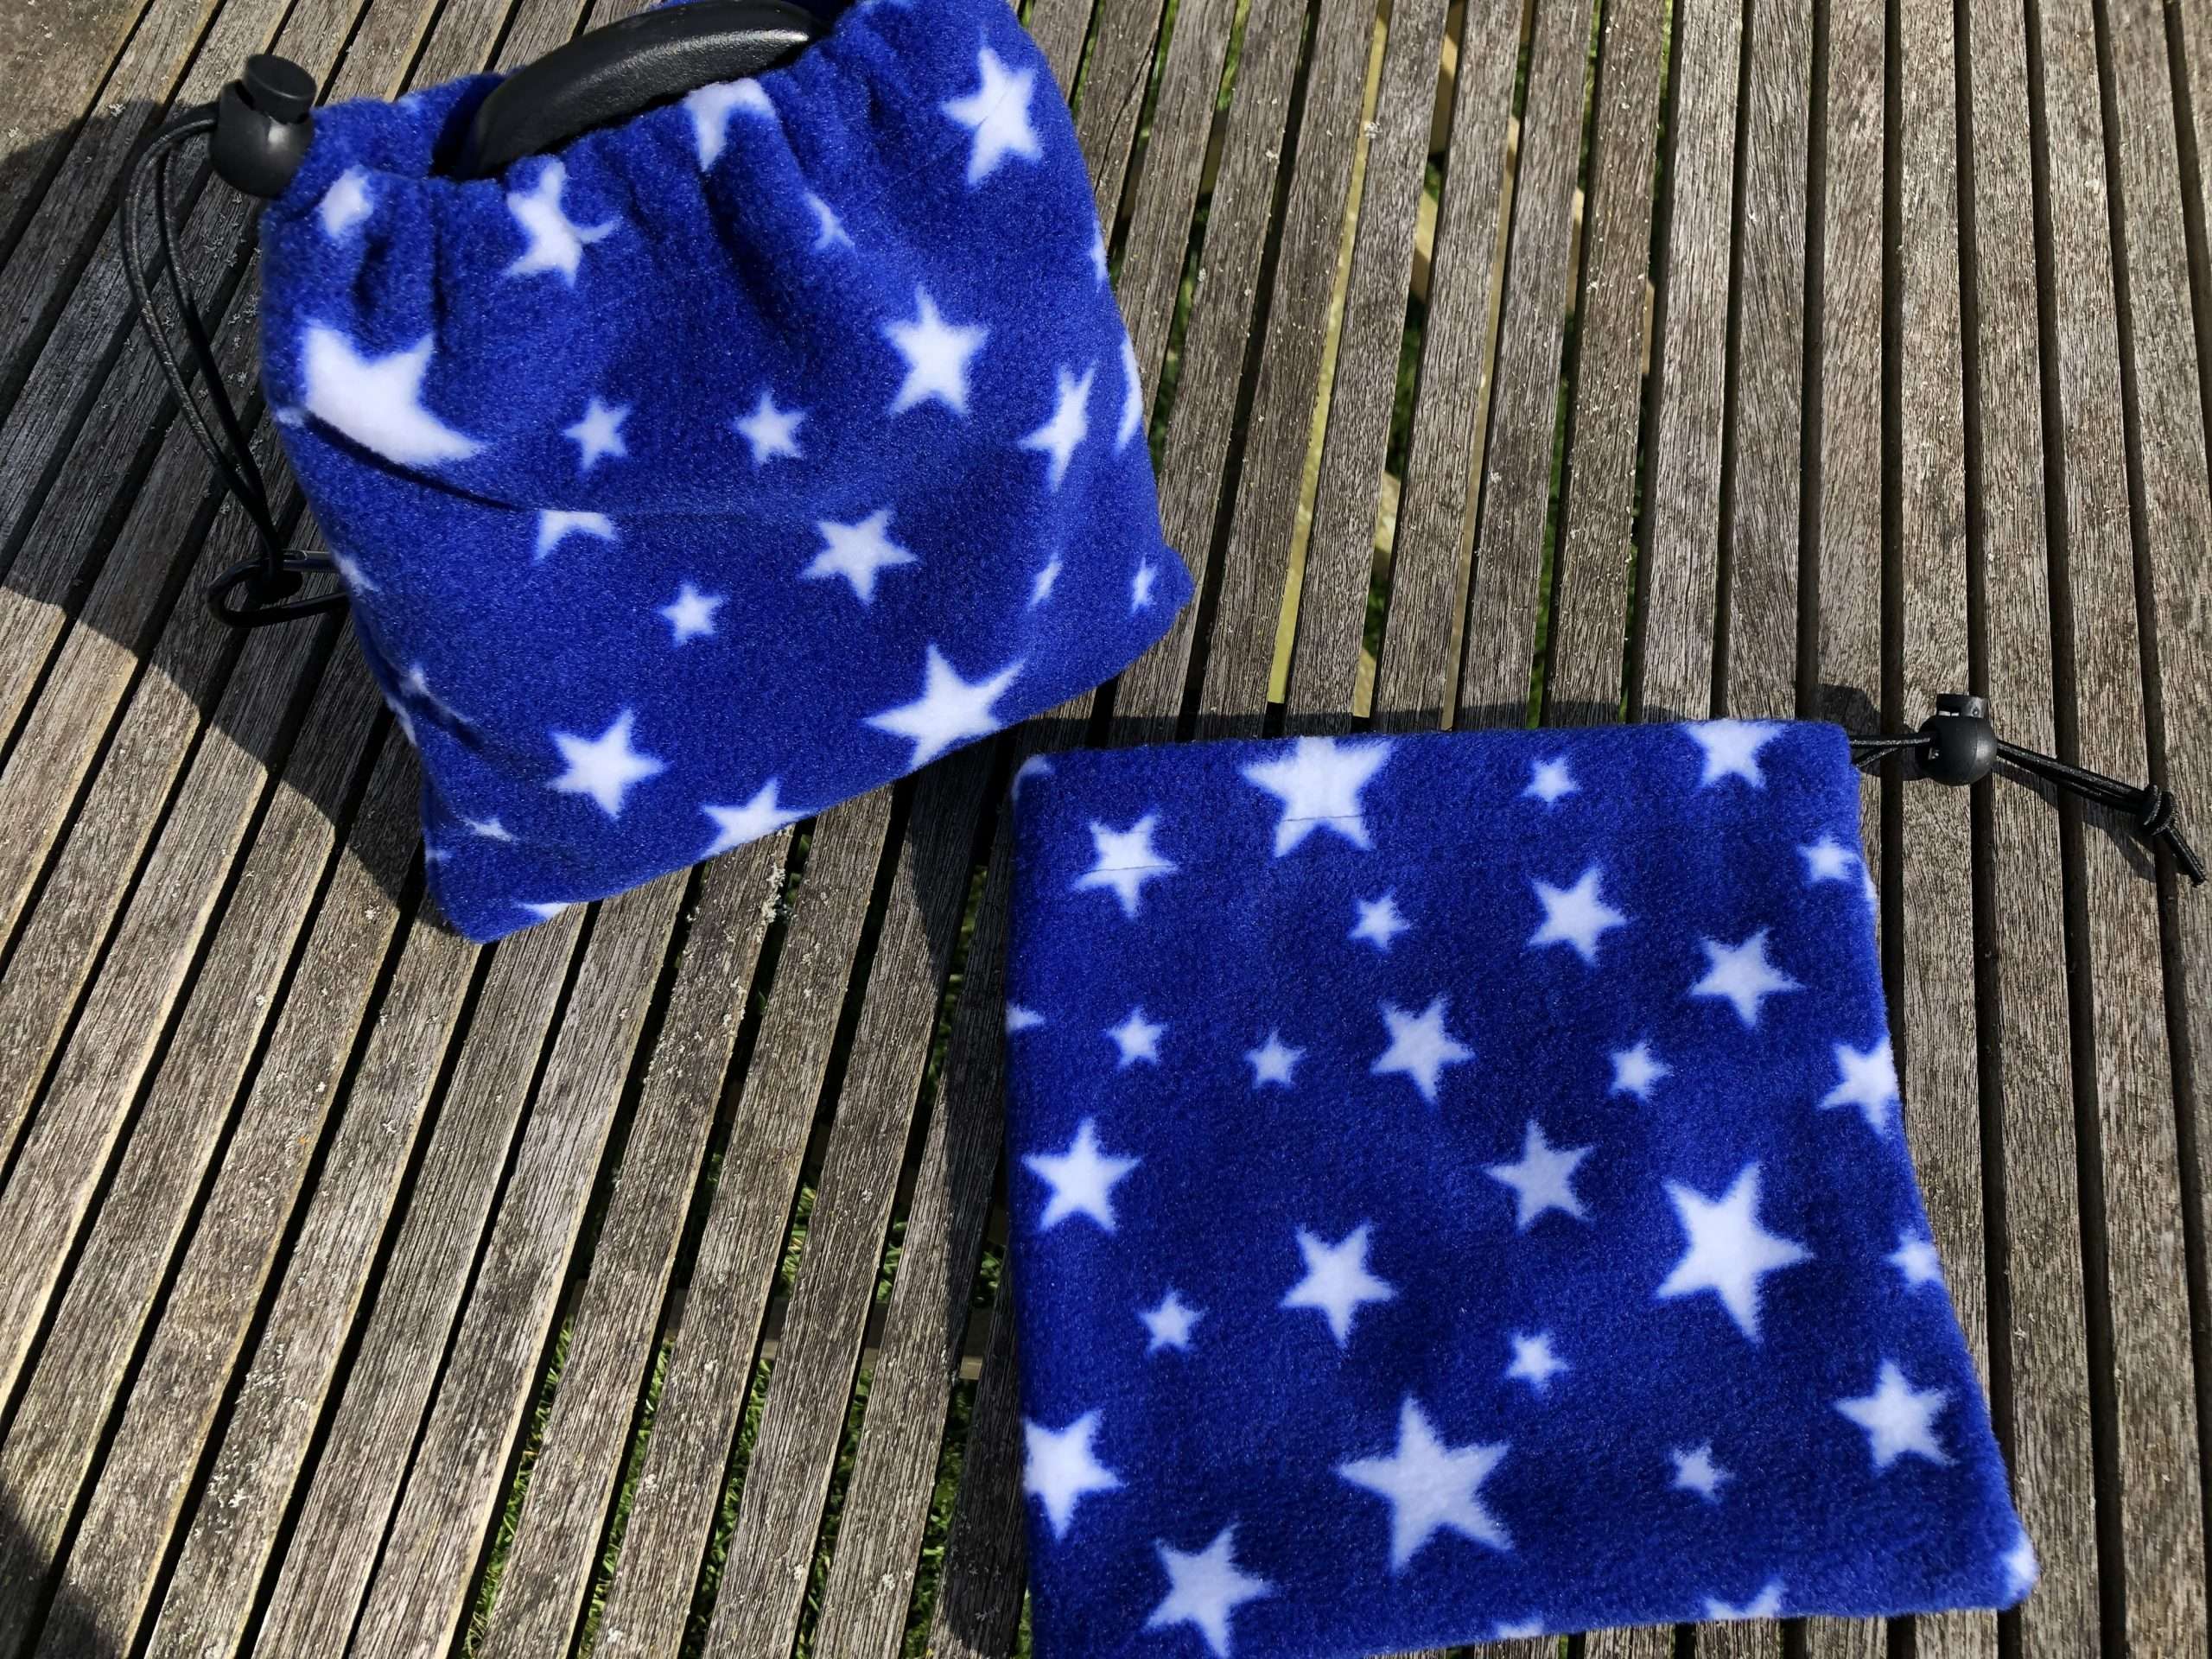 IMG 2341 scaled Fleece Stirrup Covers - Stars Help protect your saddle from dirt and scratches from the stirrups. Approx 7x7 inches Items posted within 1-3 working days. Shipped using Royal Mail 2nd Class. Back orders allow an extra 7 - 8 working days.